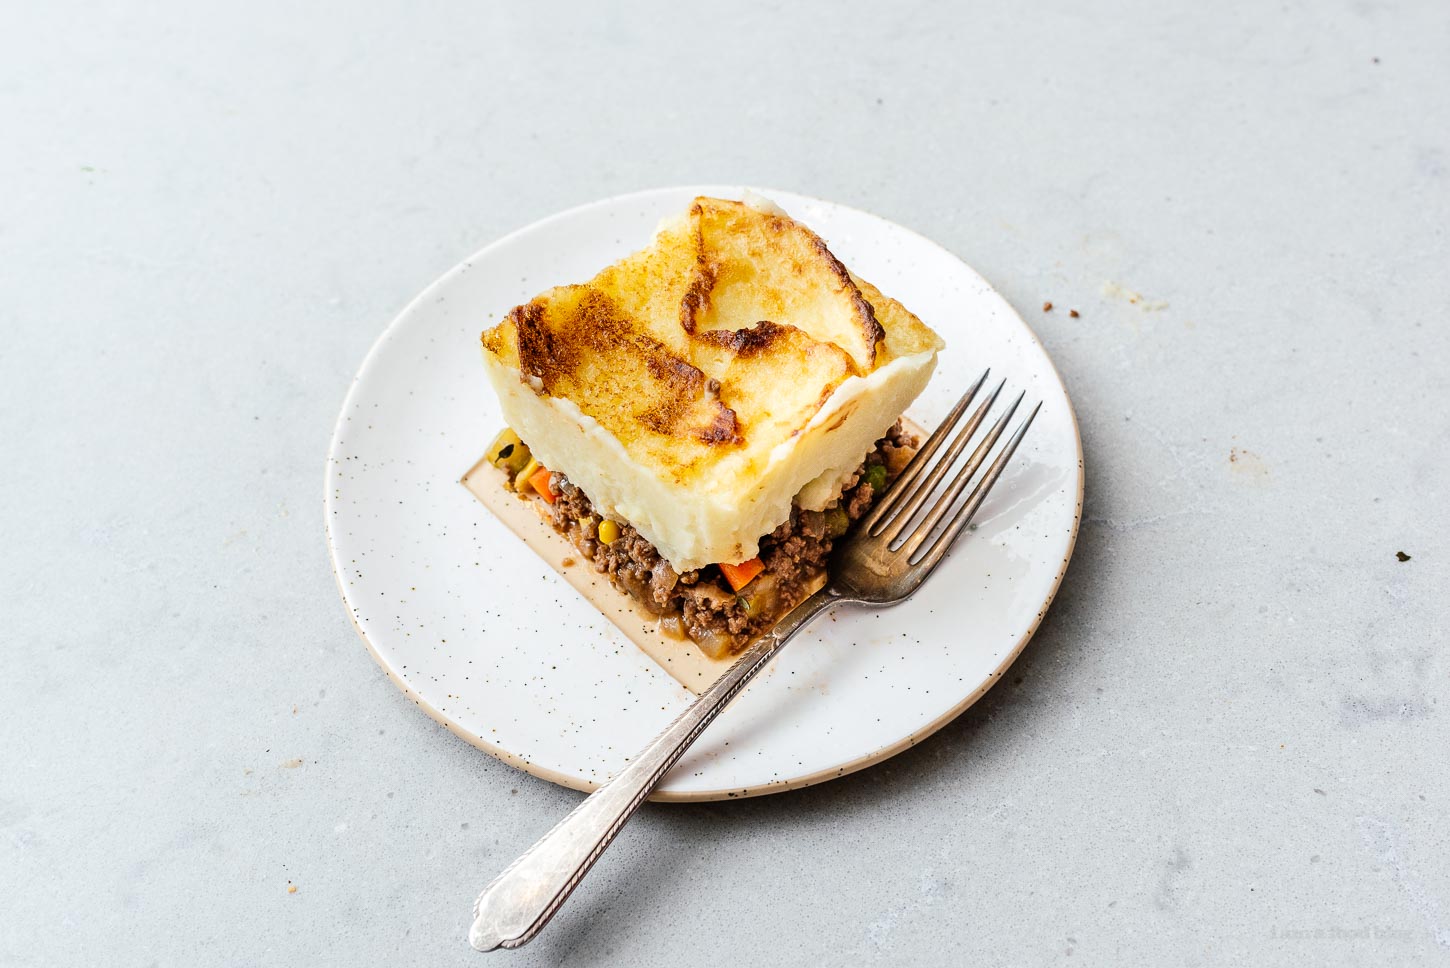 hachis parmentier |  www.iamafoodblog.com